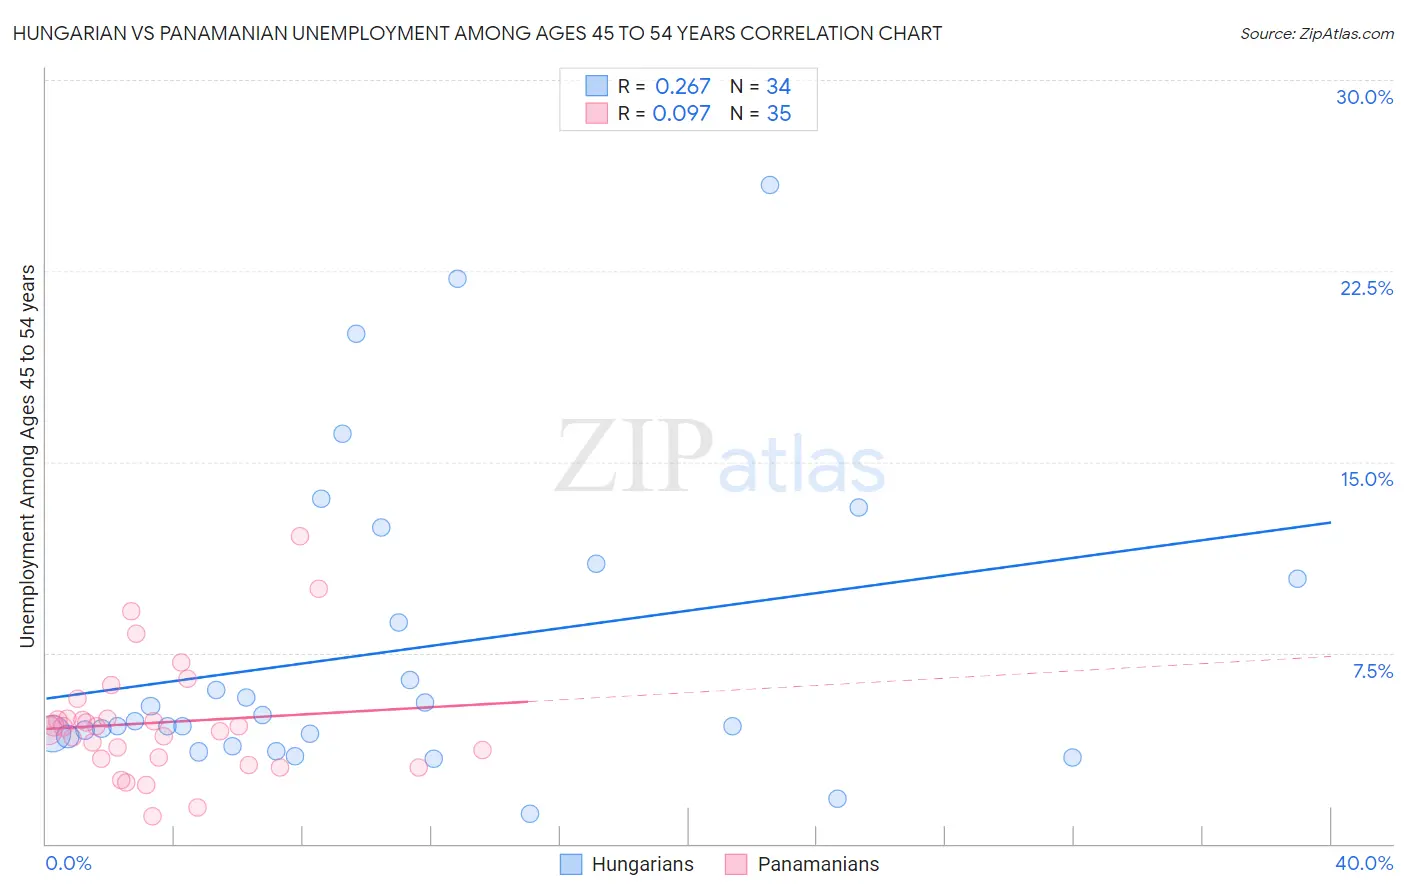 Hungarian vs Panamanian Unemployment Among Ages 45 to 54 years